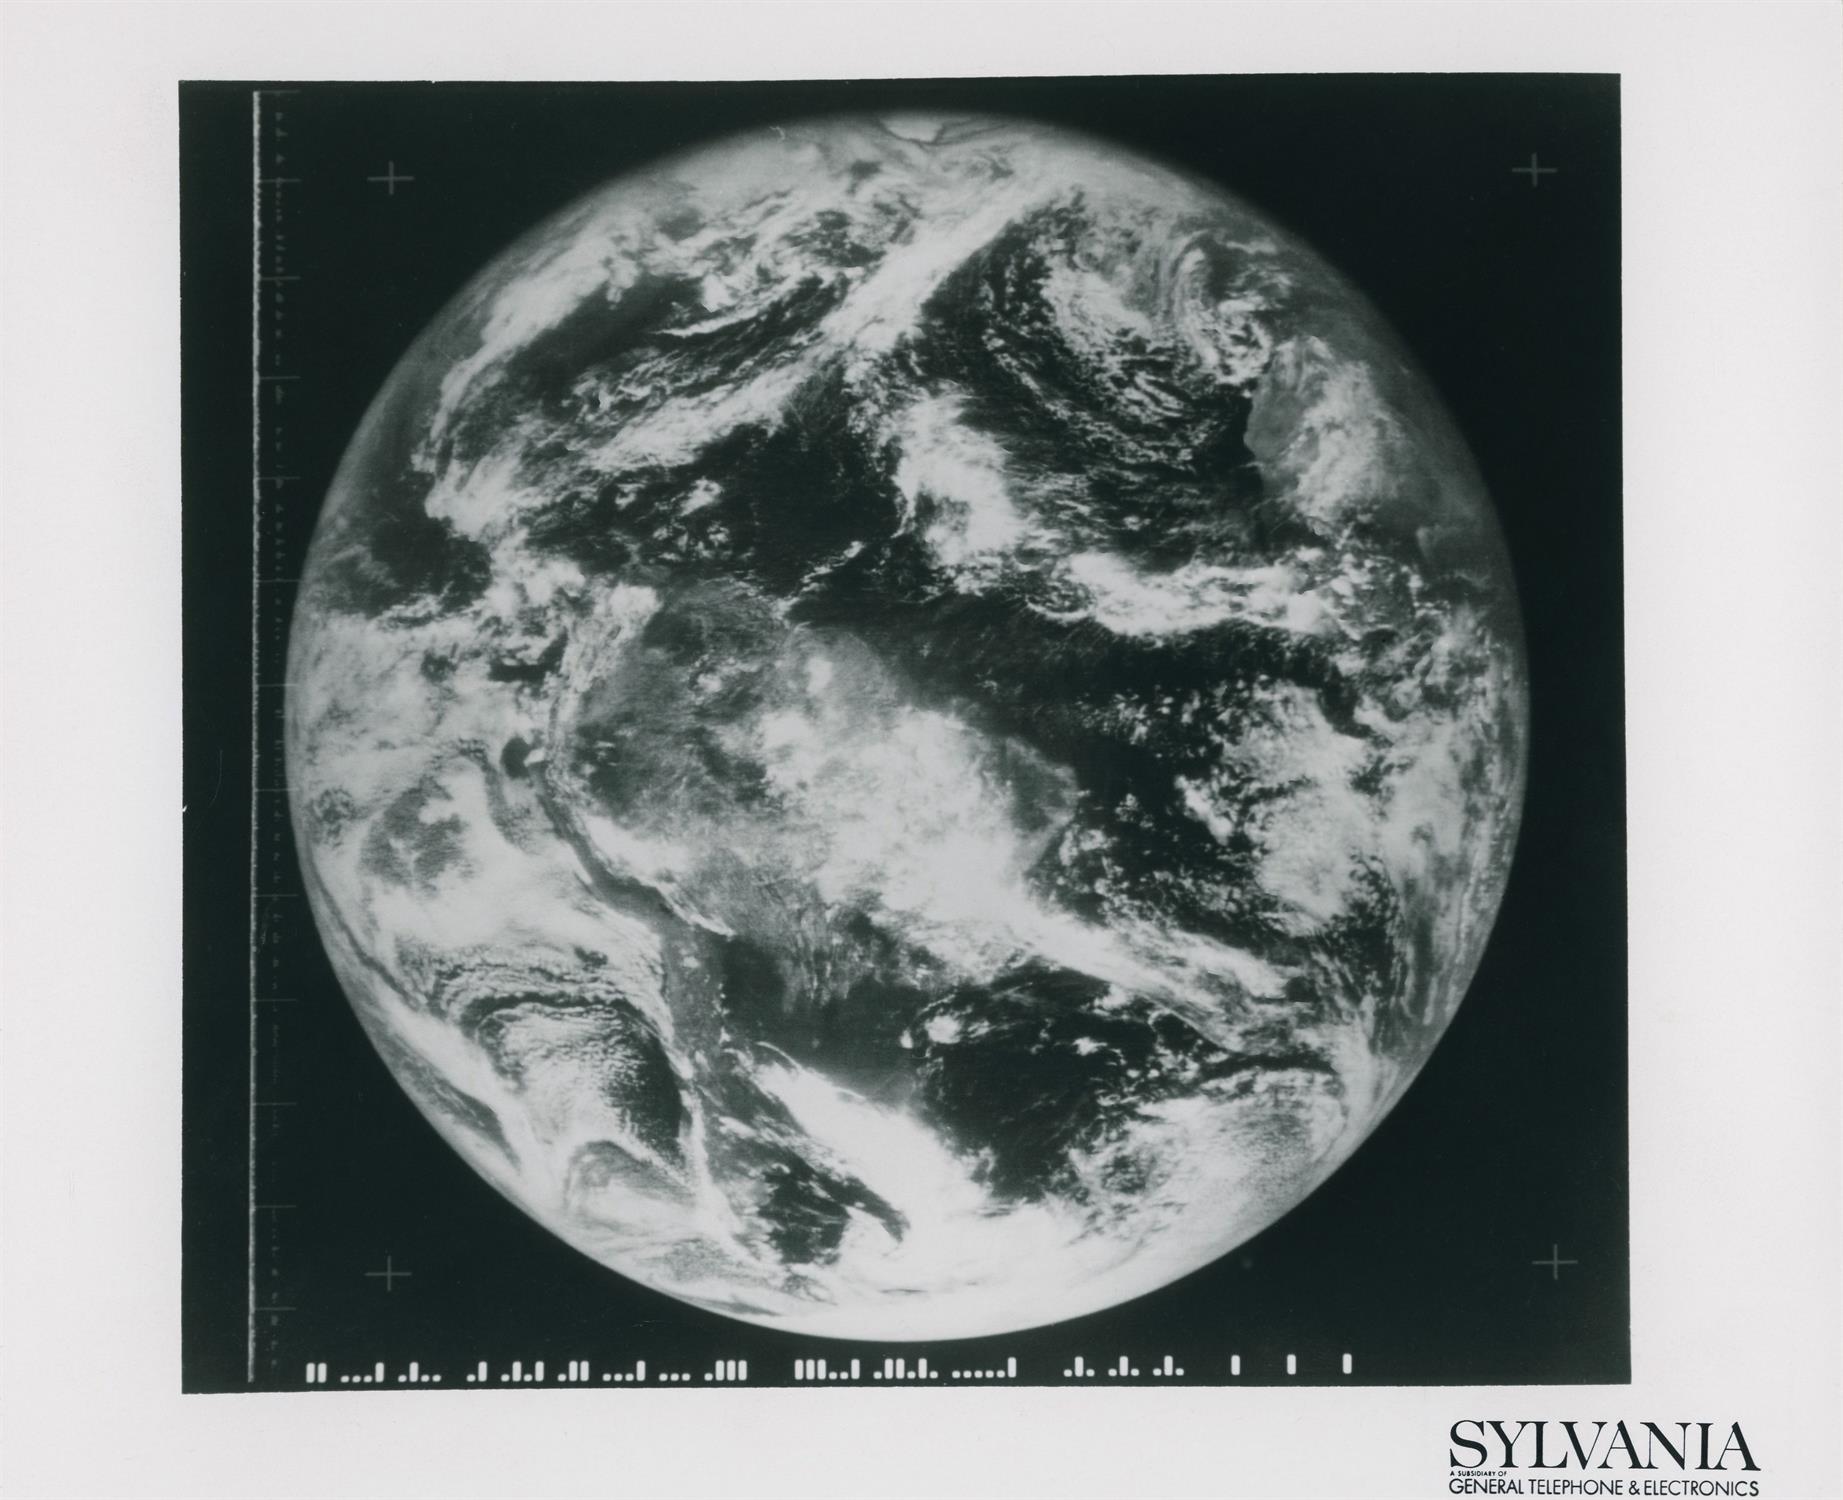 First high quality colour photograph of the full Earth (b&w version), ATS 3, November 1967